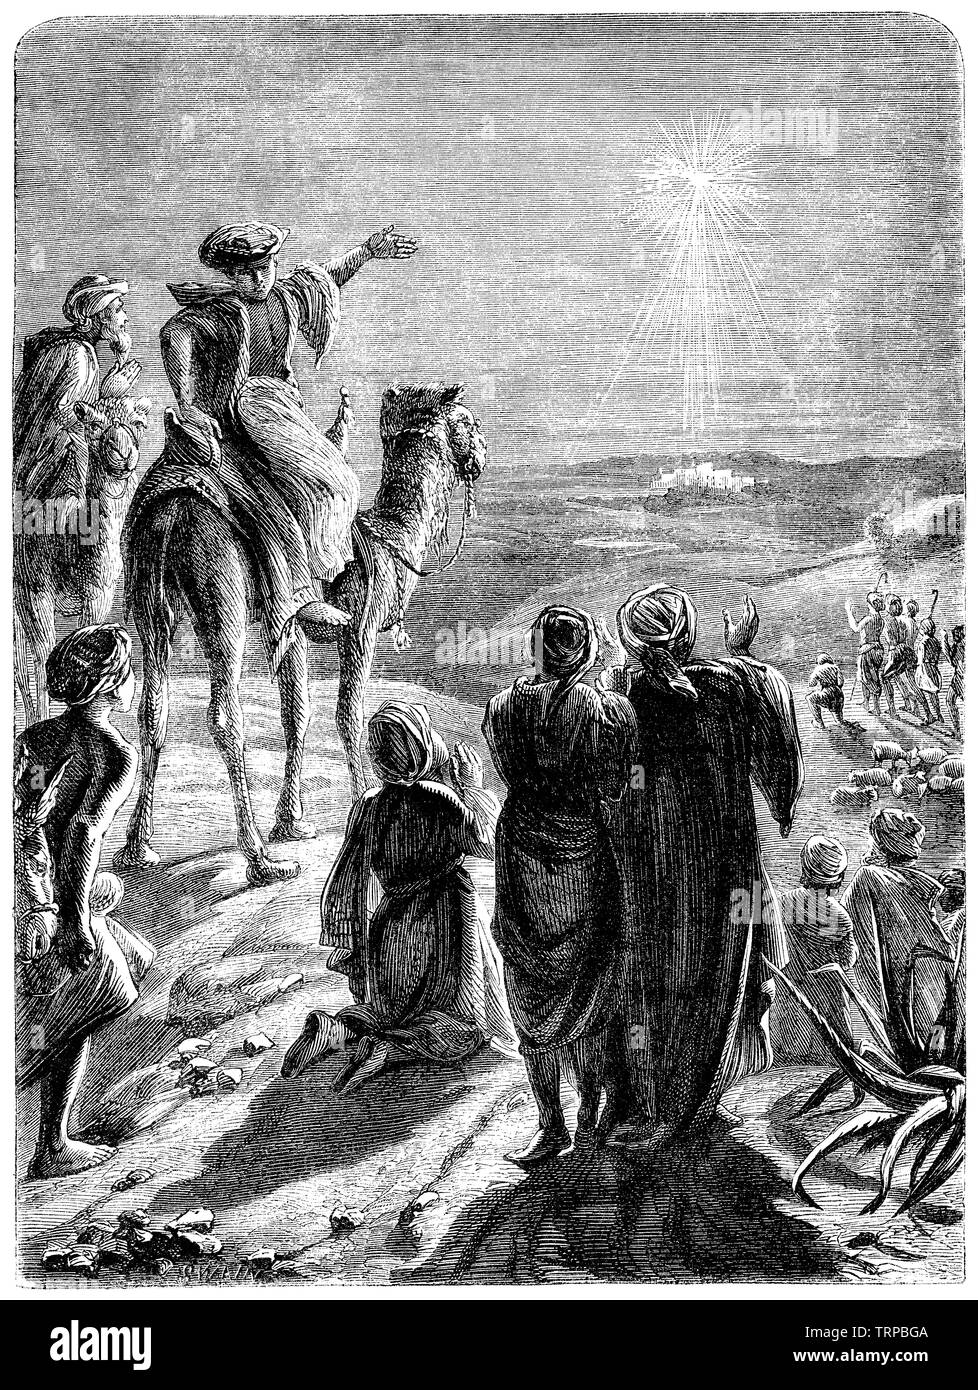 1872 engraving of the Three Wise Men following the star to the birth of Jesus Christ in Bethlehem. Stock Photo